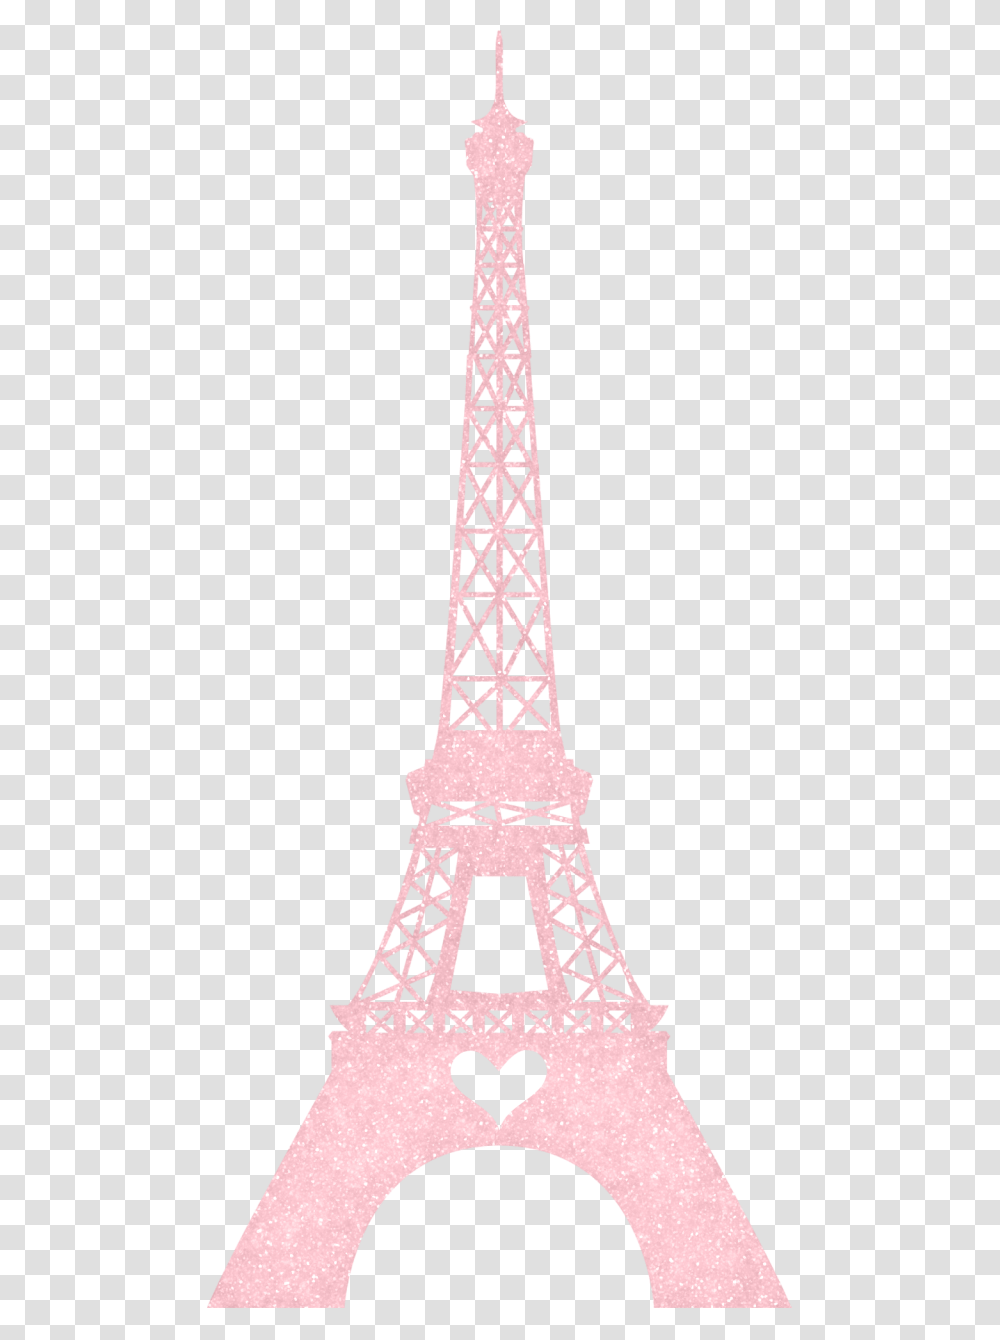 Pink Eiffel Tower Clip Art, Construction Crane, Cable, Electric Transmission Tower, Power Lines Transparent Png